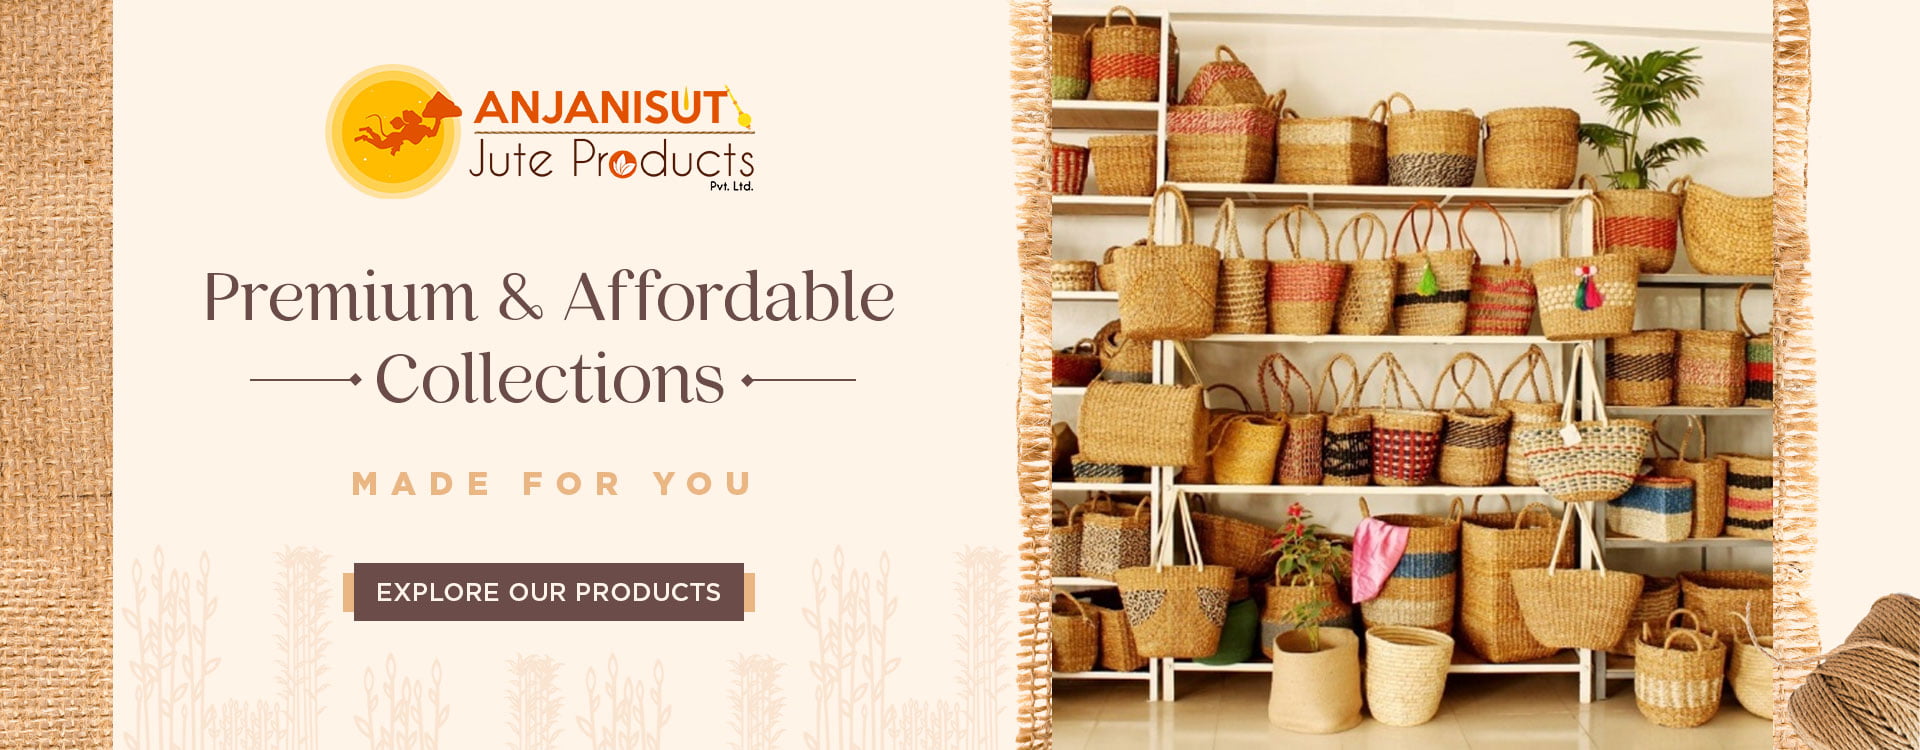 Anjanisut Jute Products Premium & Affordable collections made for you